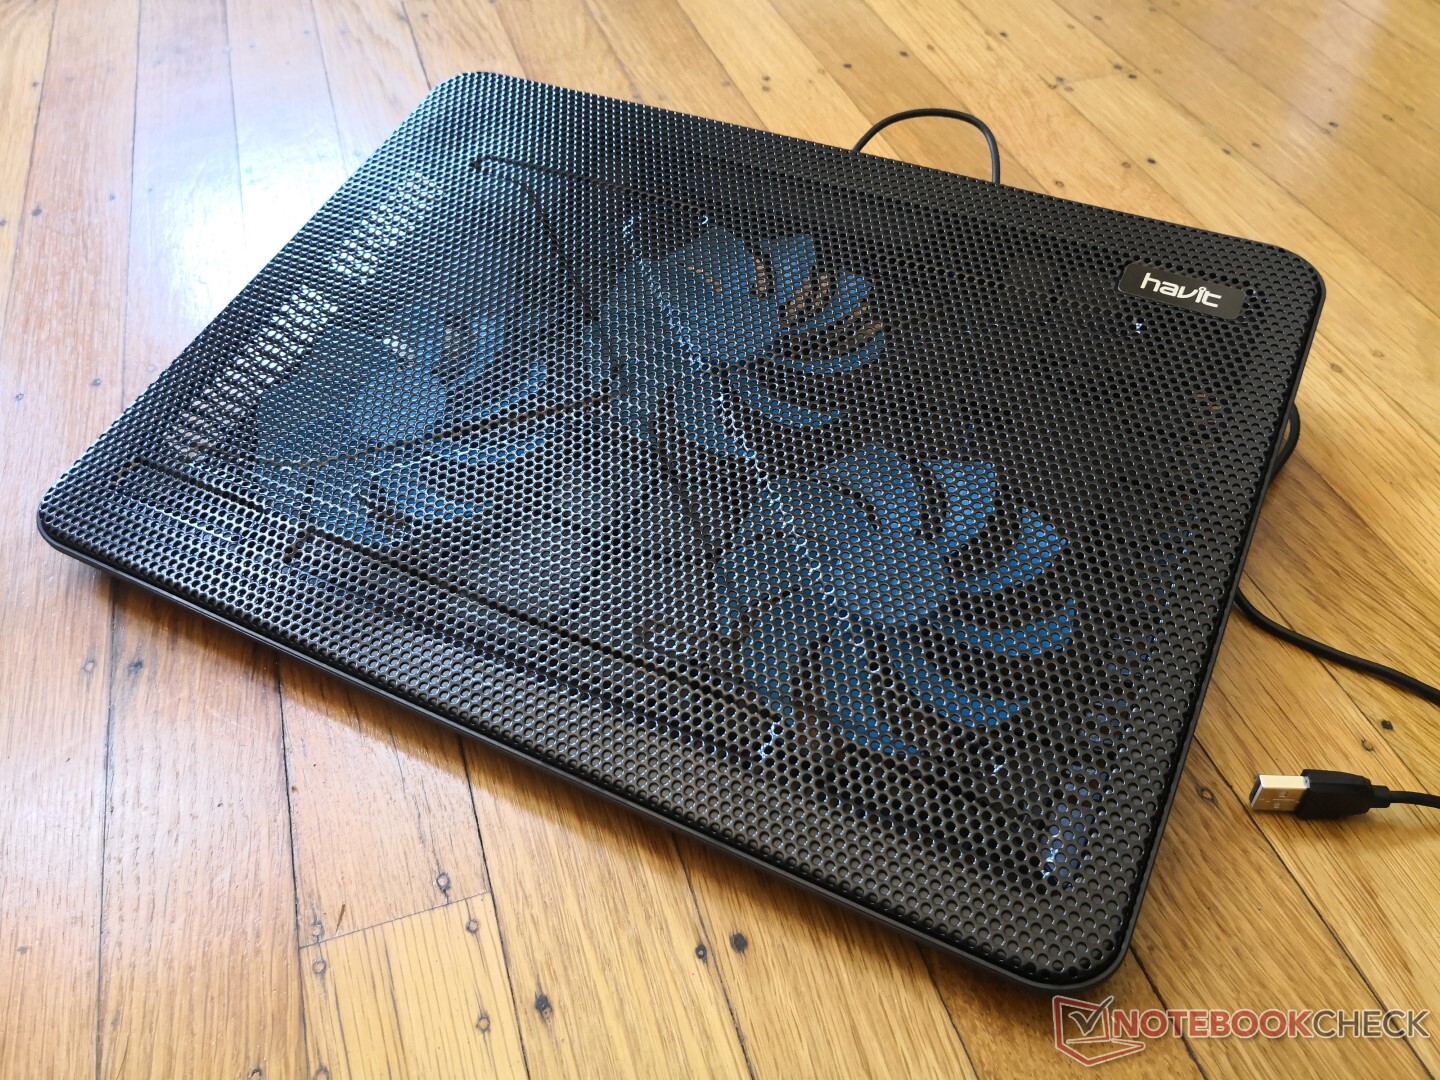 How well does a laptop cooling pad work? We 'd one ourselves